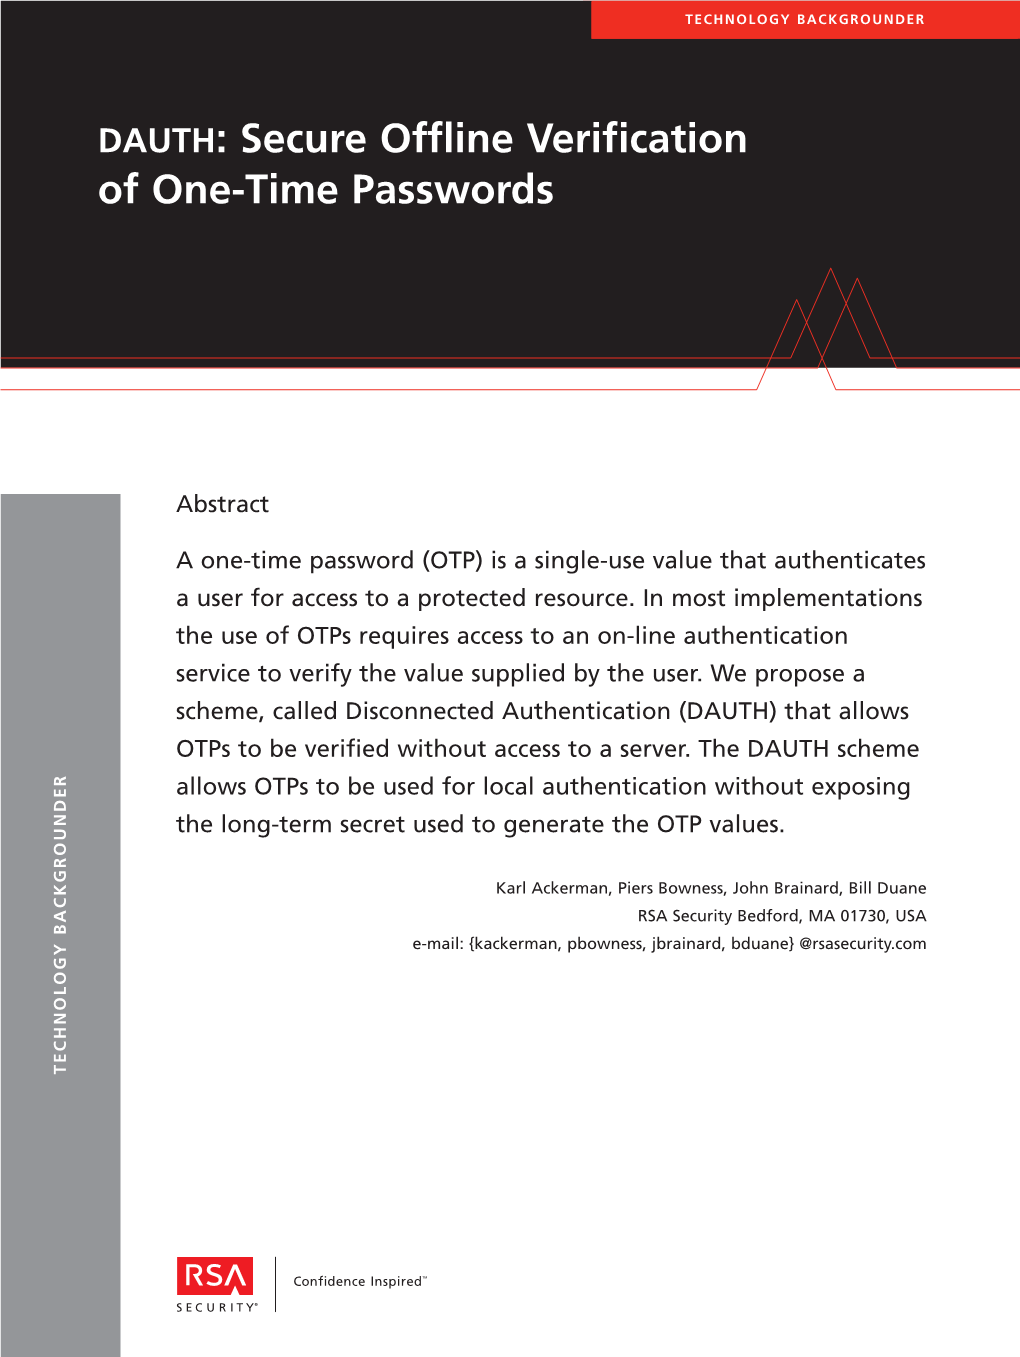 Secure Offline Verification of One-Time Passwords